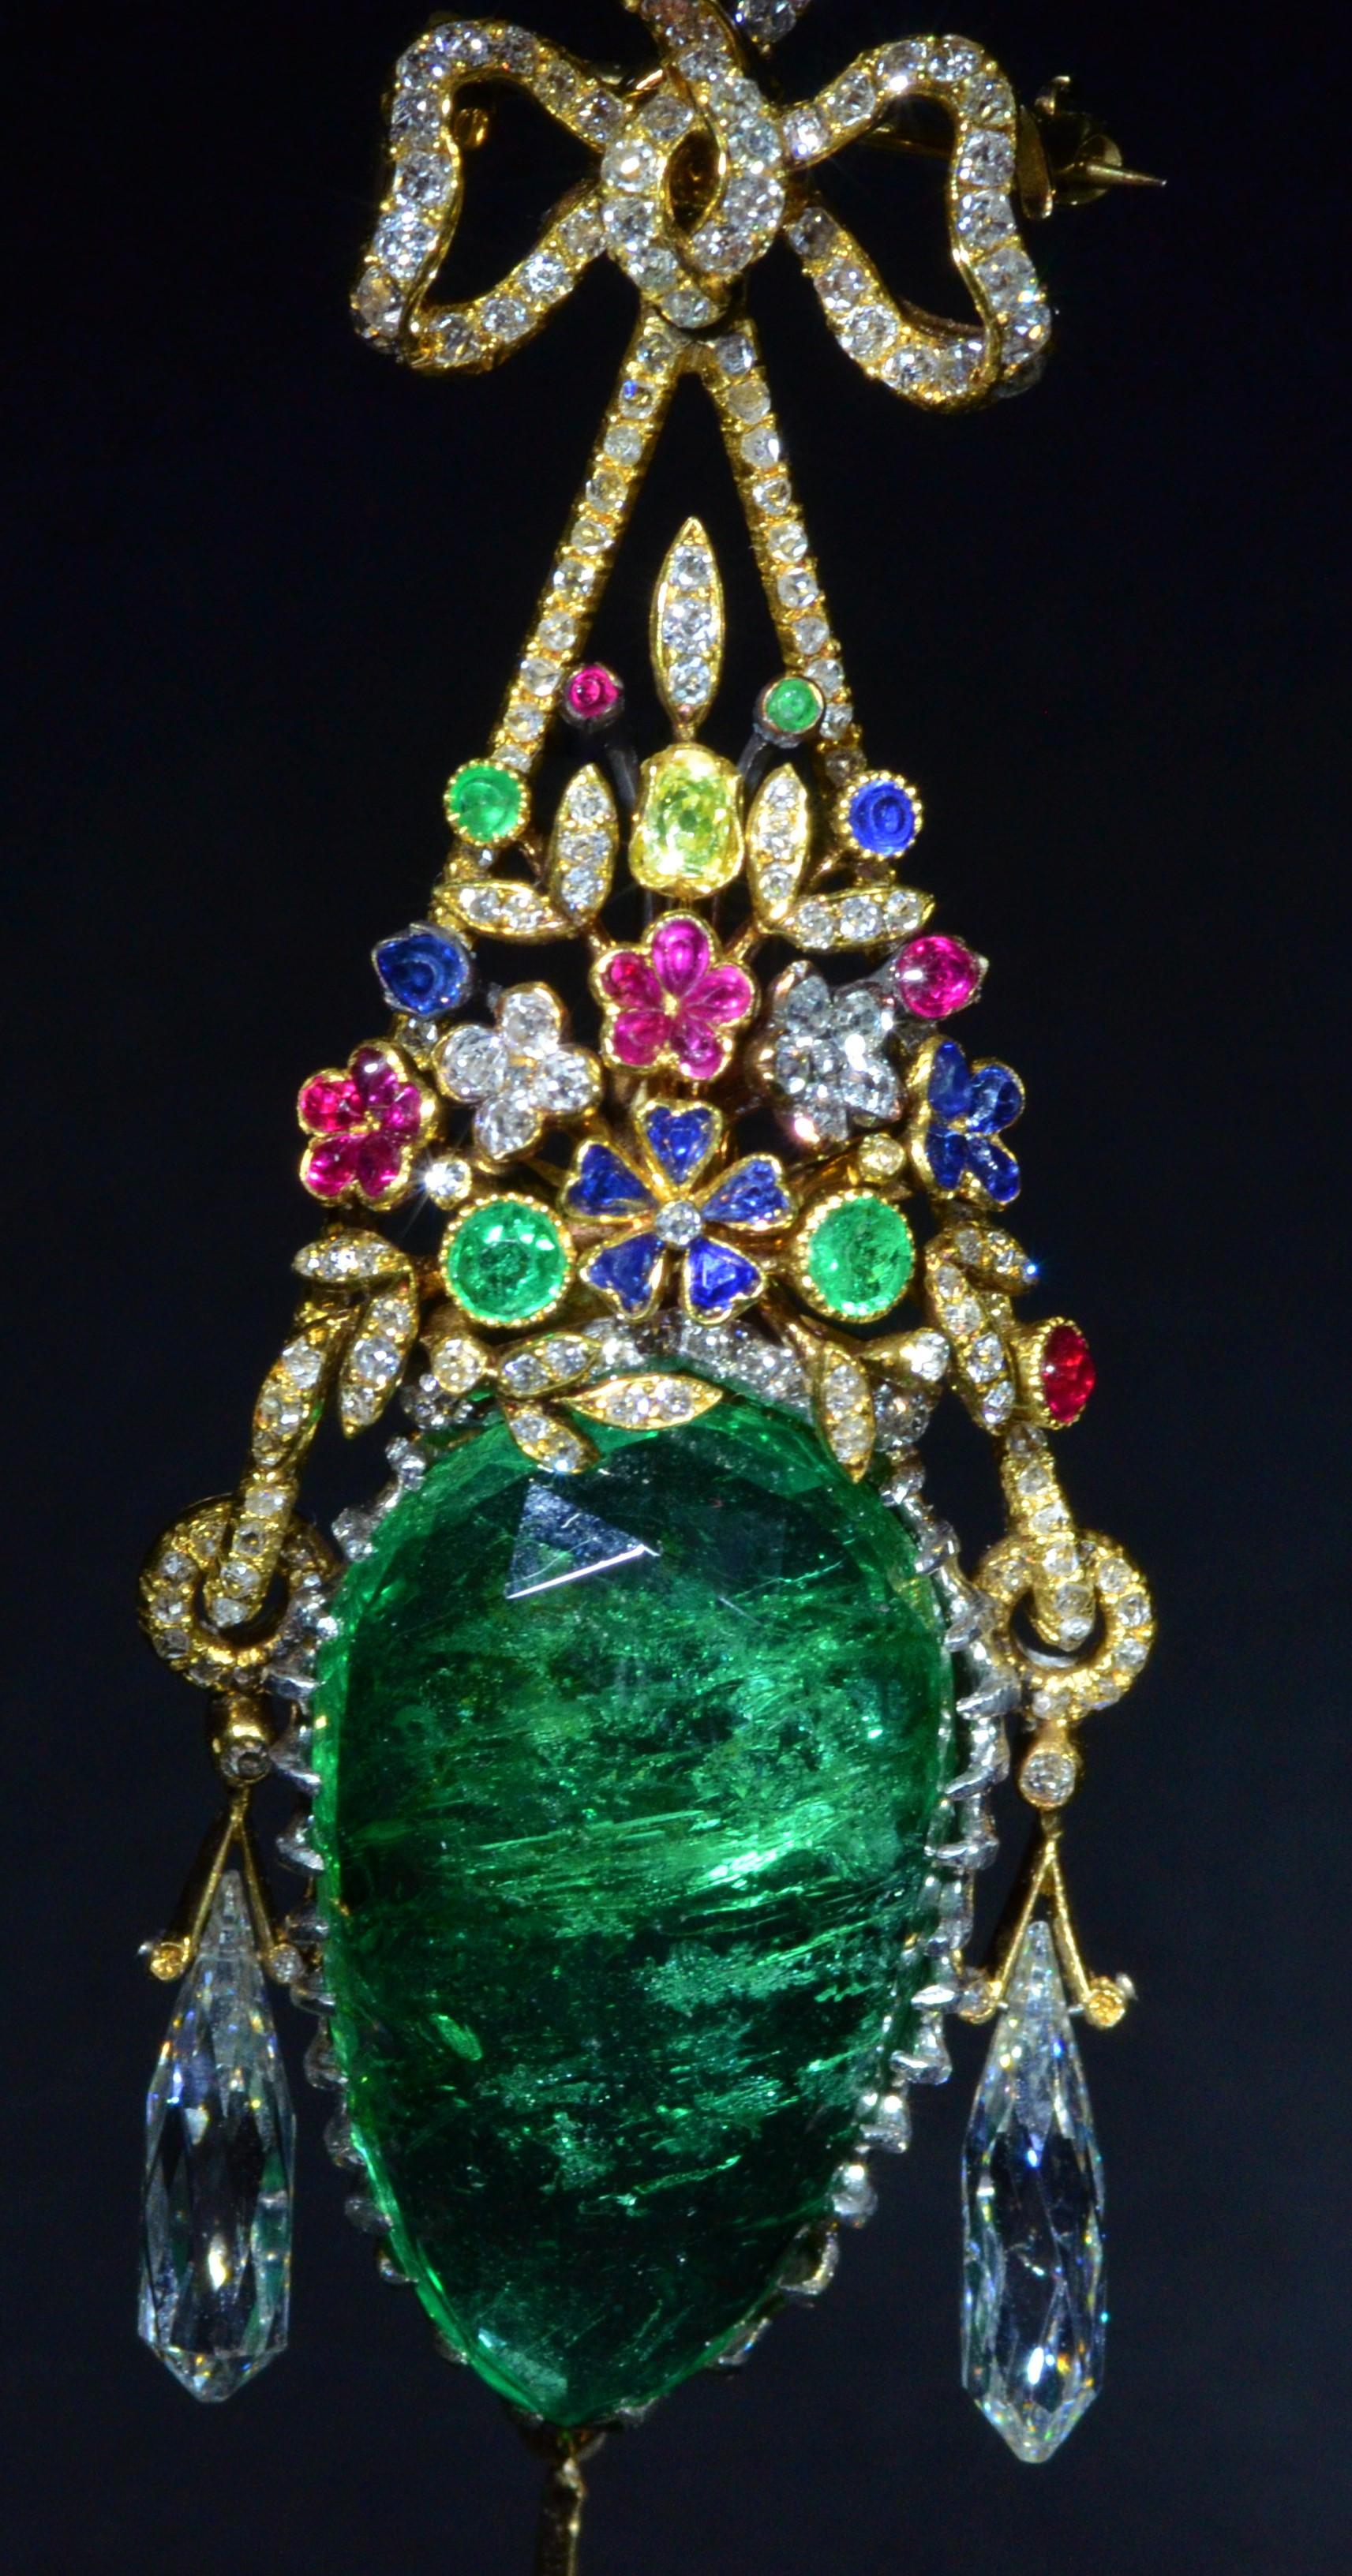 Edwardian Outstanding Multi-Gem Pendant Brooch by Frederic Boucheron, circa 1890 For Sale